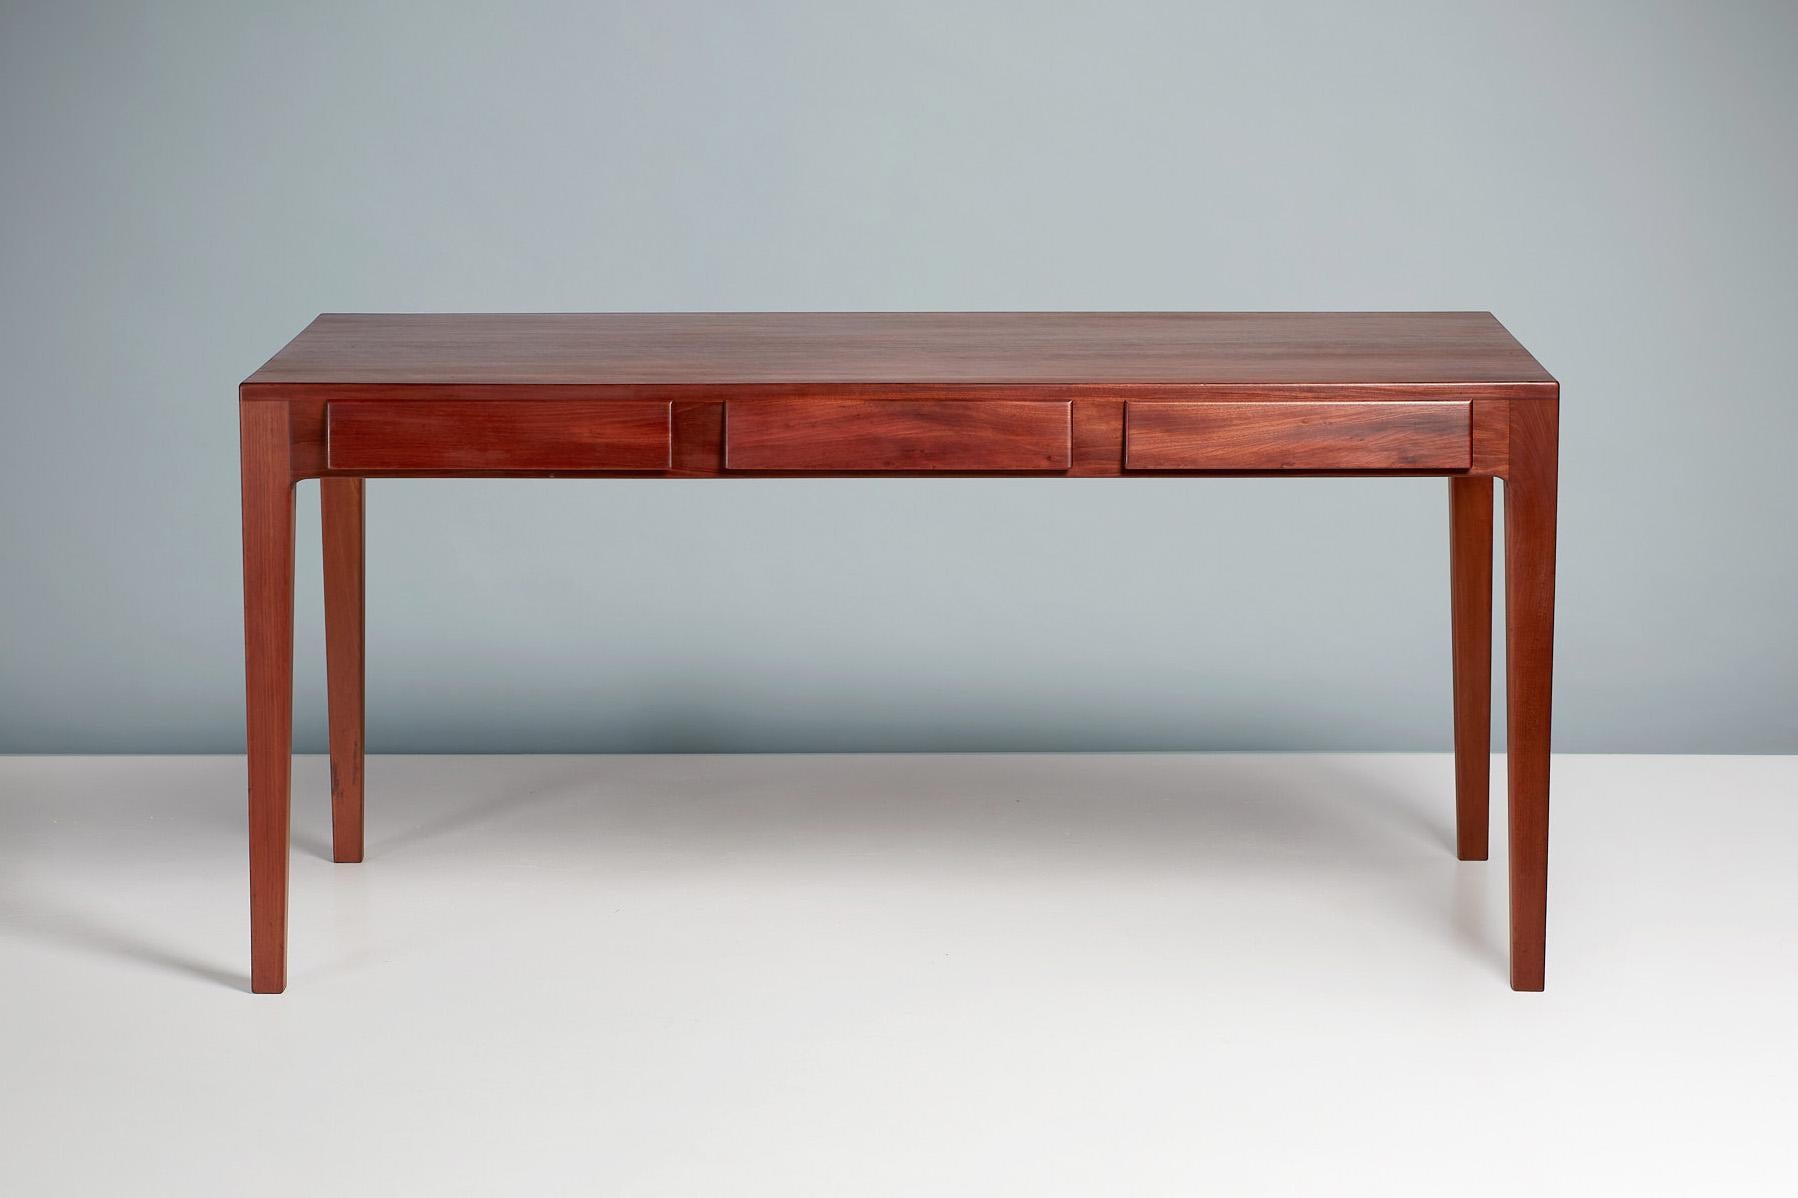 Danish cabinetmaker - 1940s writing desk

This exceptional, minimalist desk was produced in Denmark in the 1940s by an anonymous cabinetmaker and we believe it to be unique. The desk is made from exquisite Cuban mahogany with beautiful pippy grain